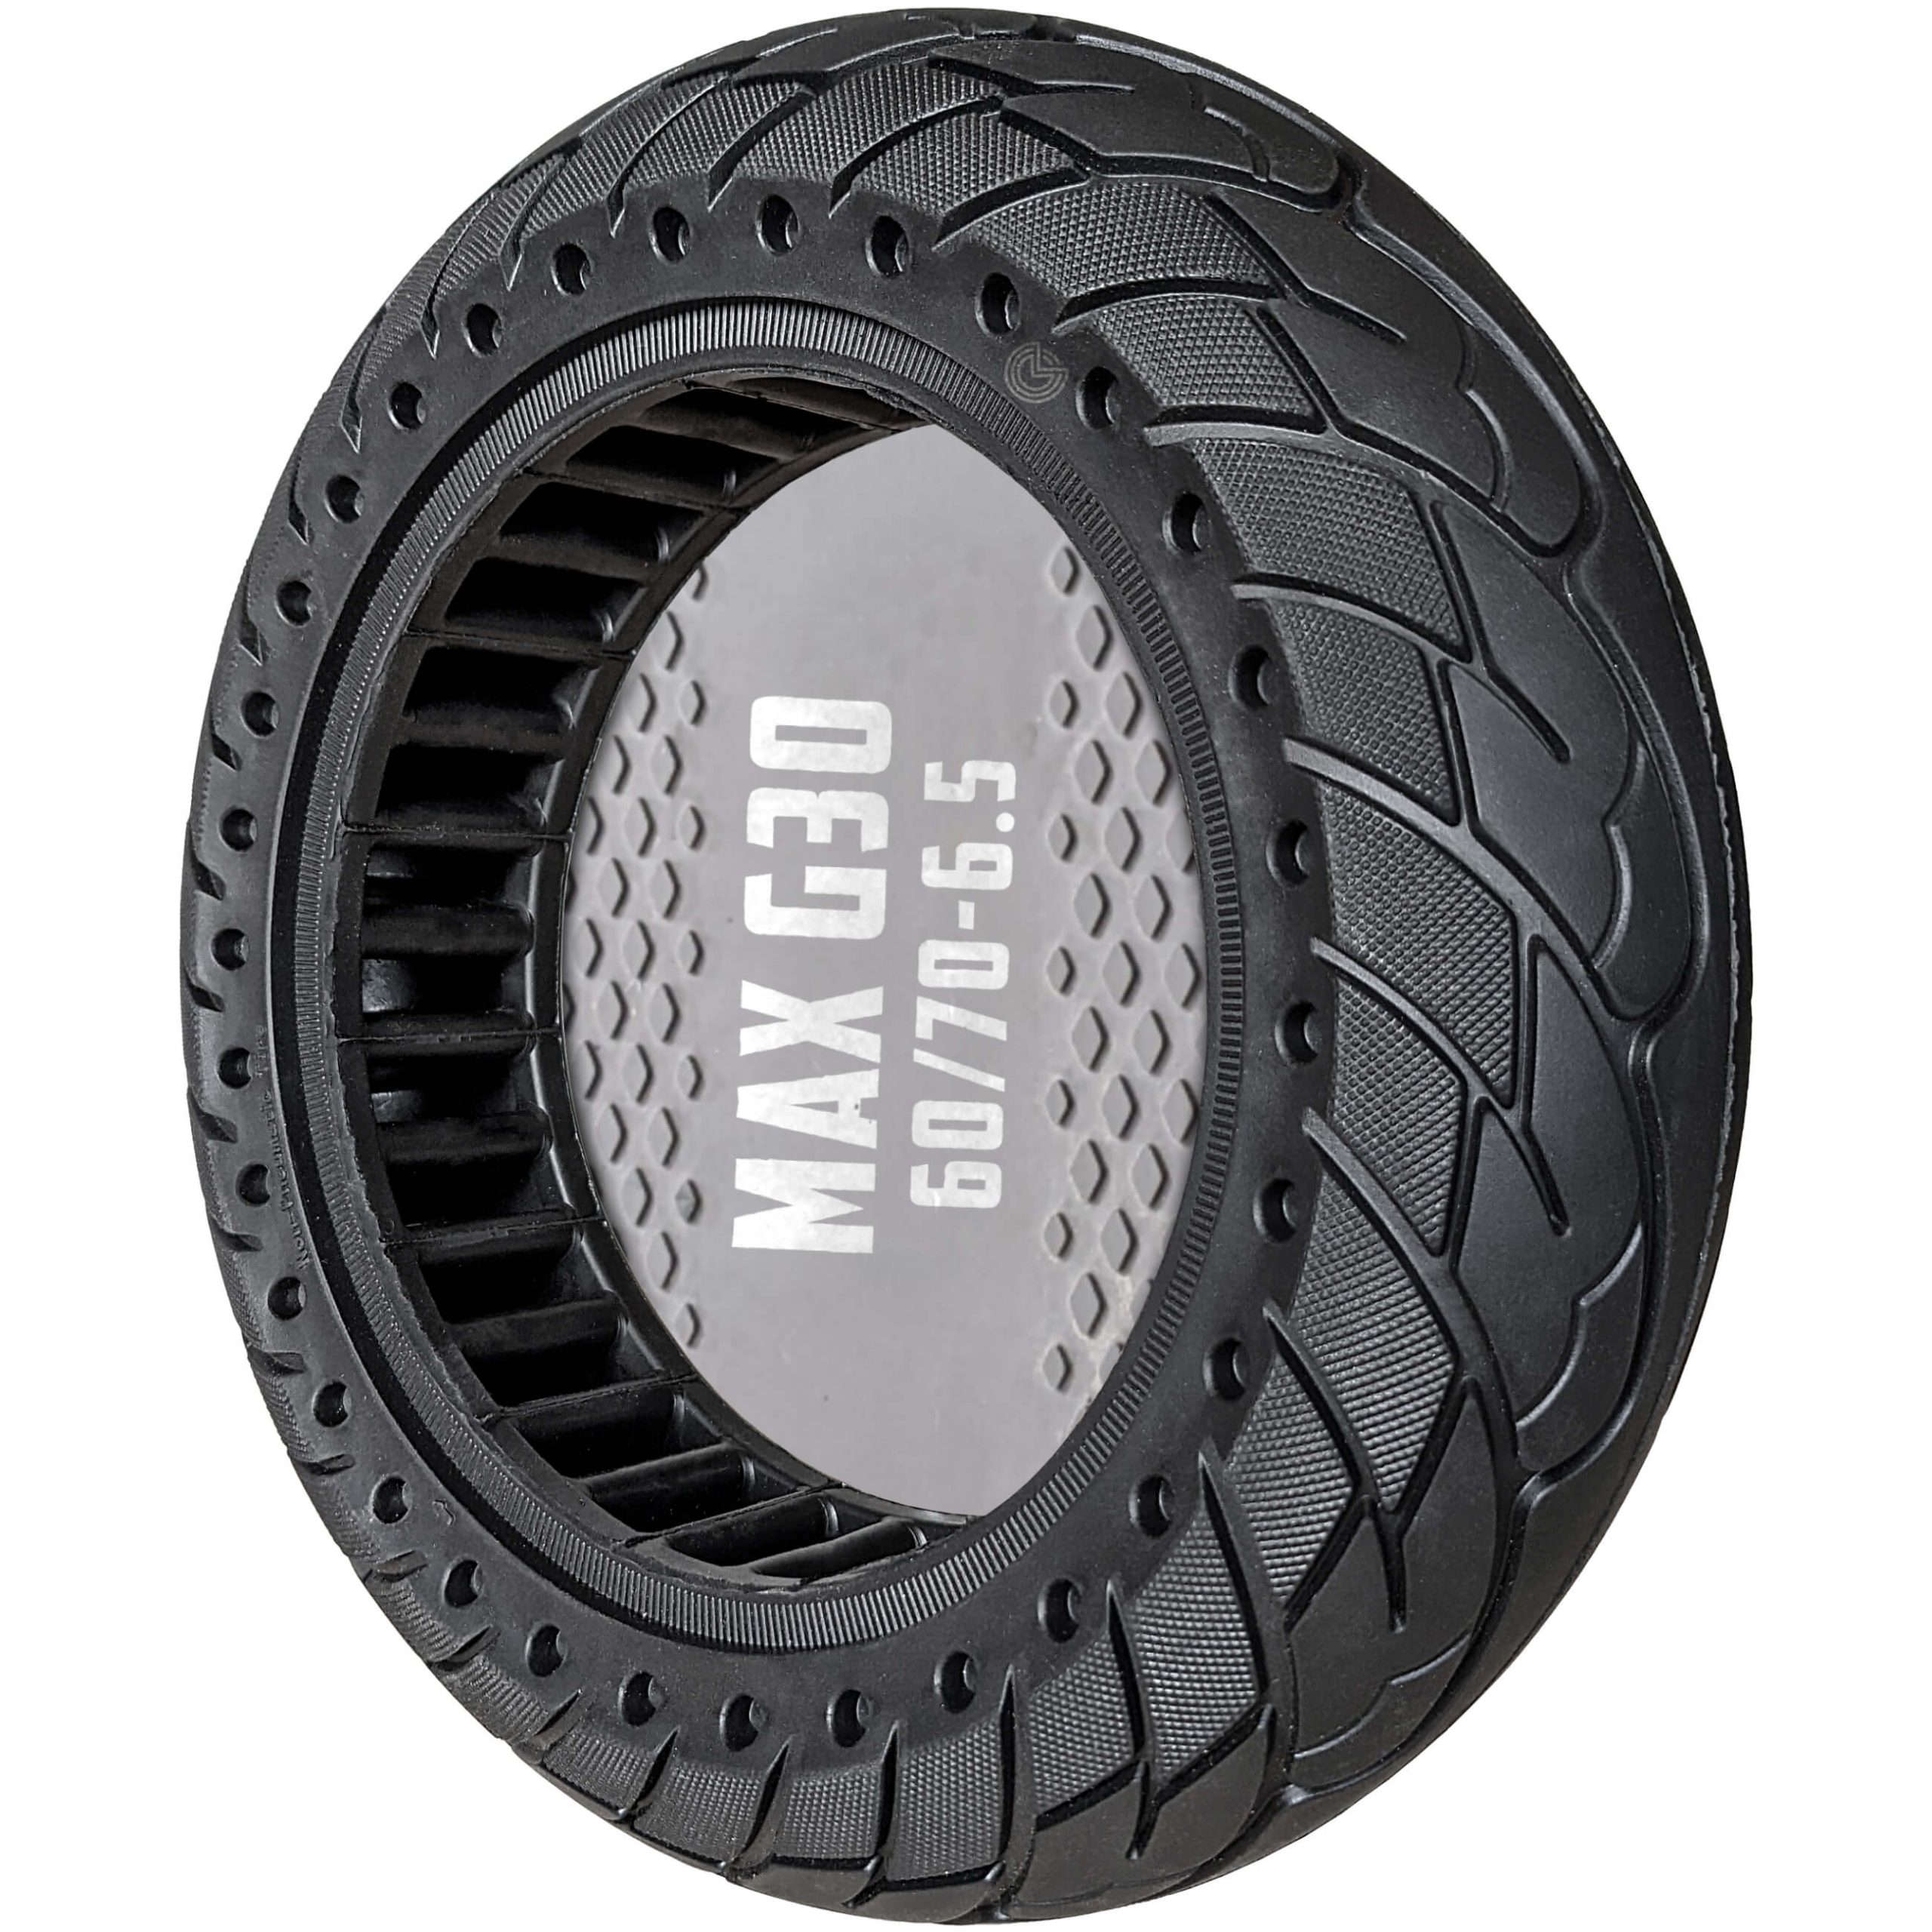 Solid Tire Ninebot G30 Max